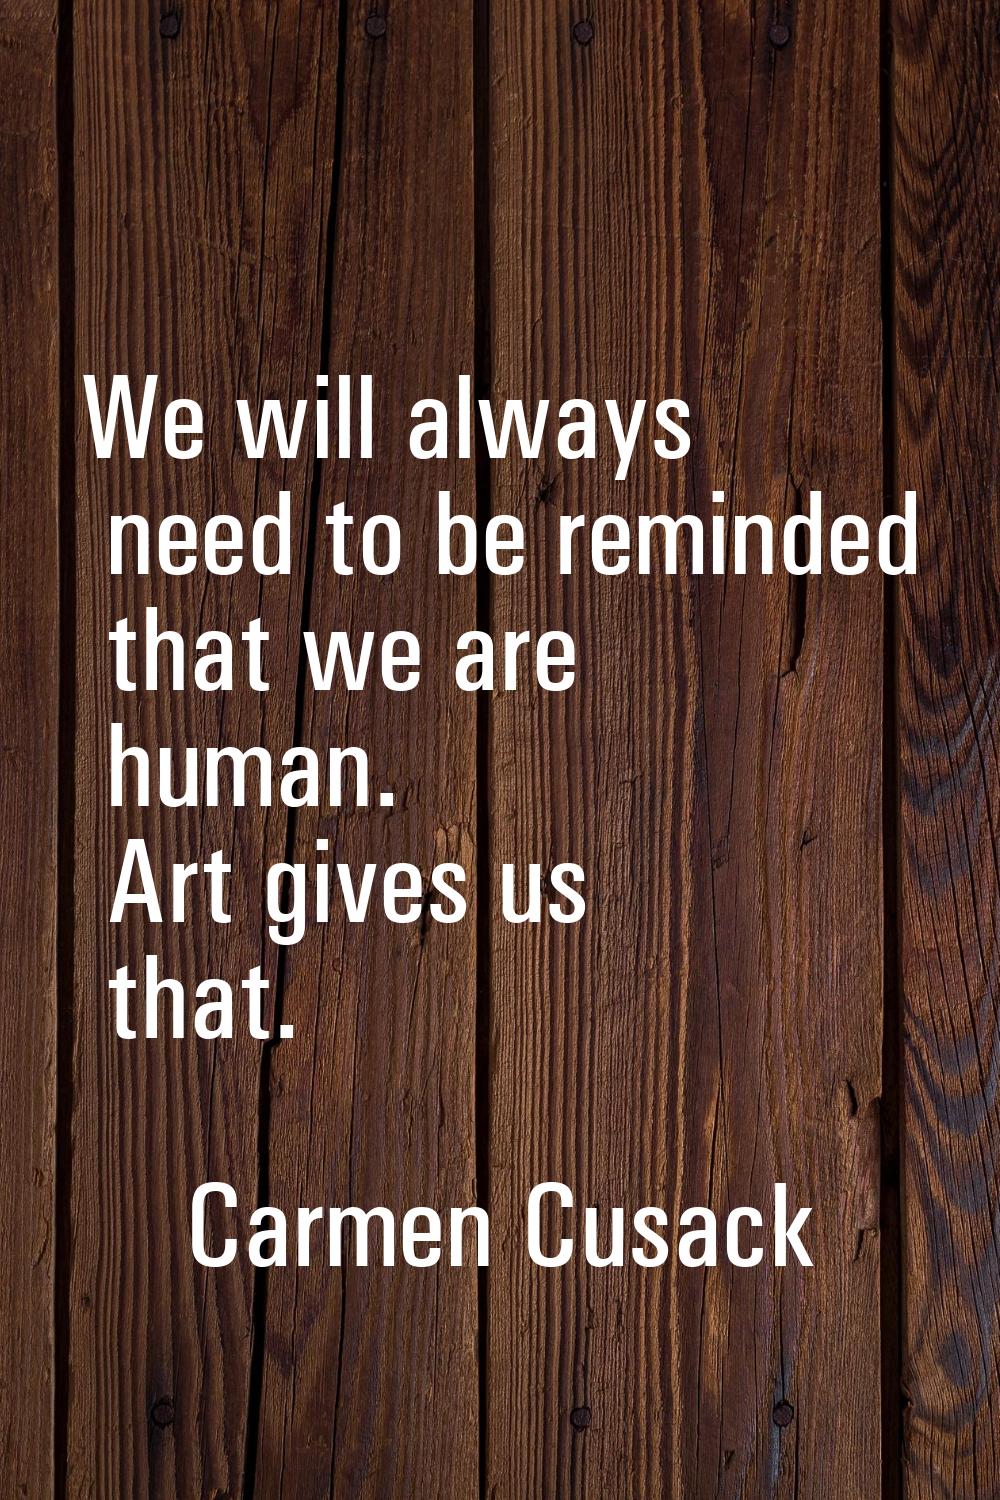 We will always need to be reminded that we are human. Art gives us that.